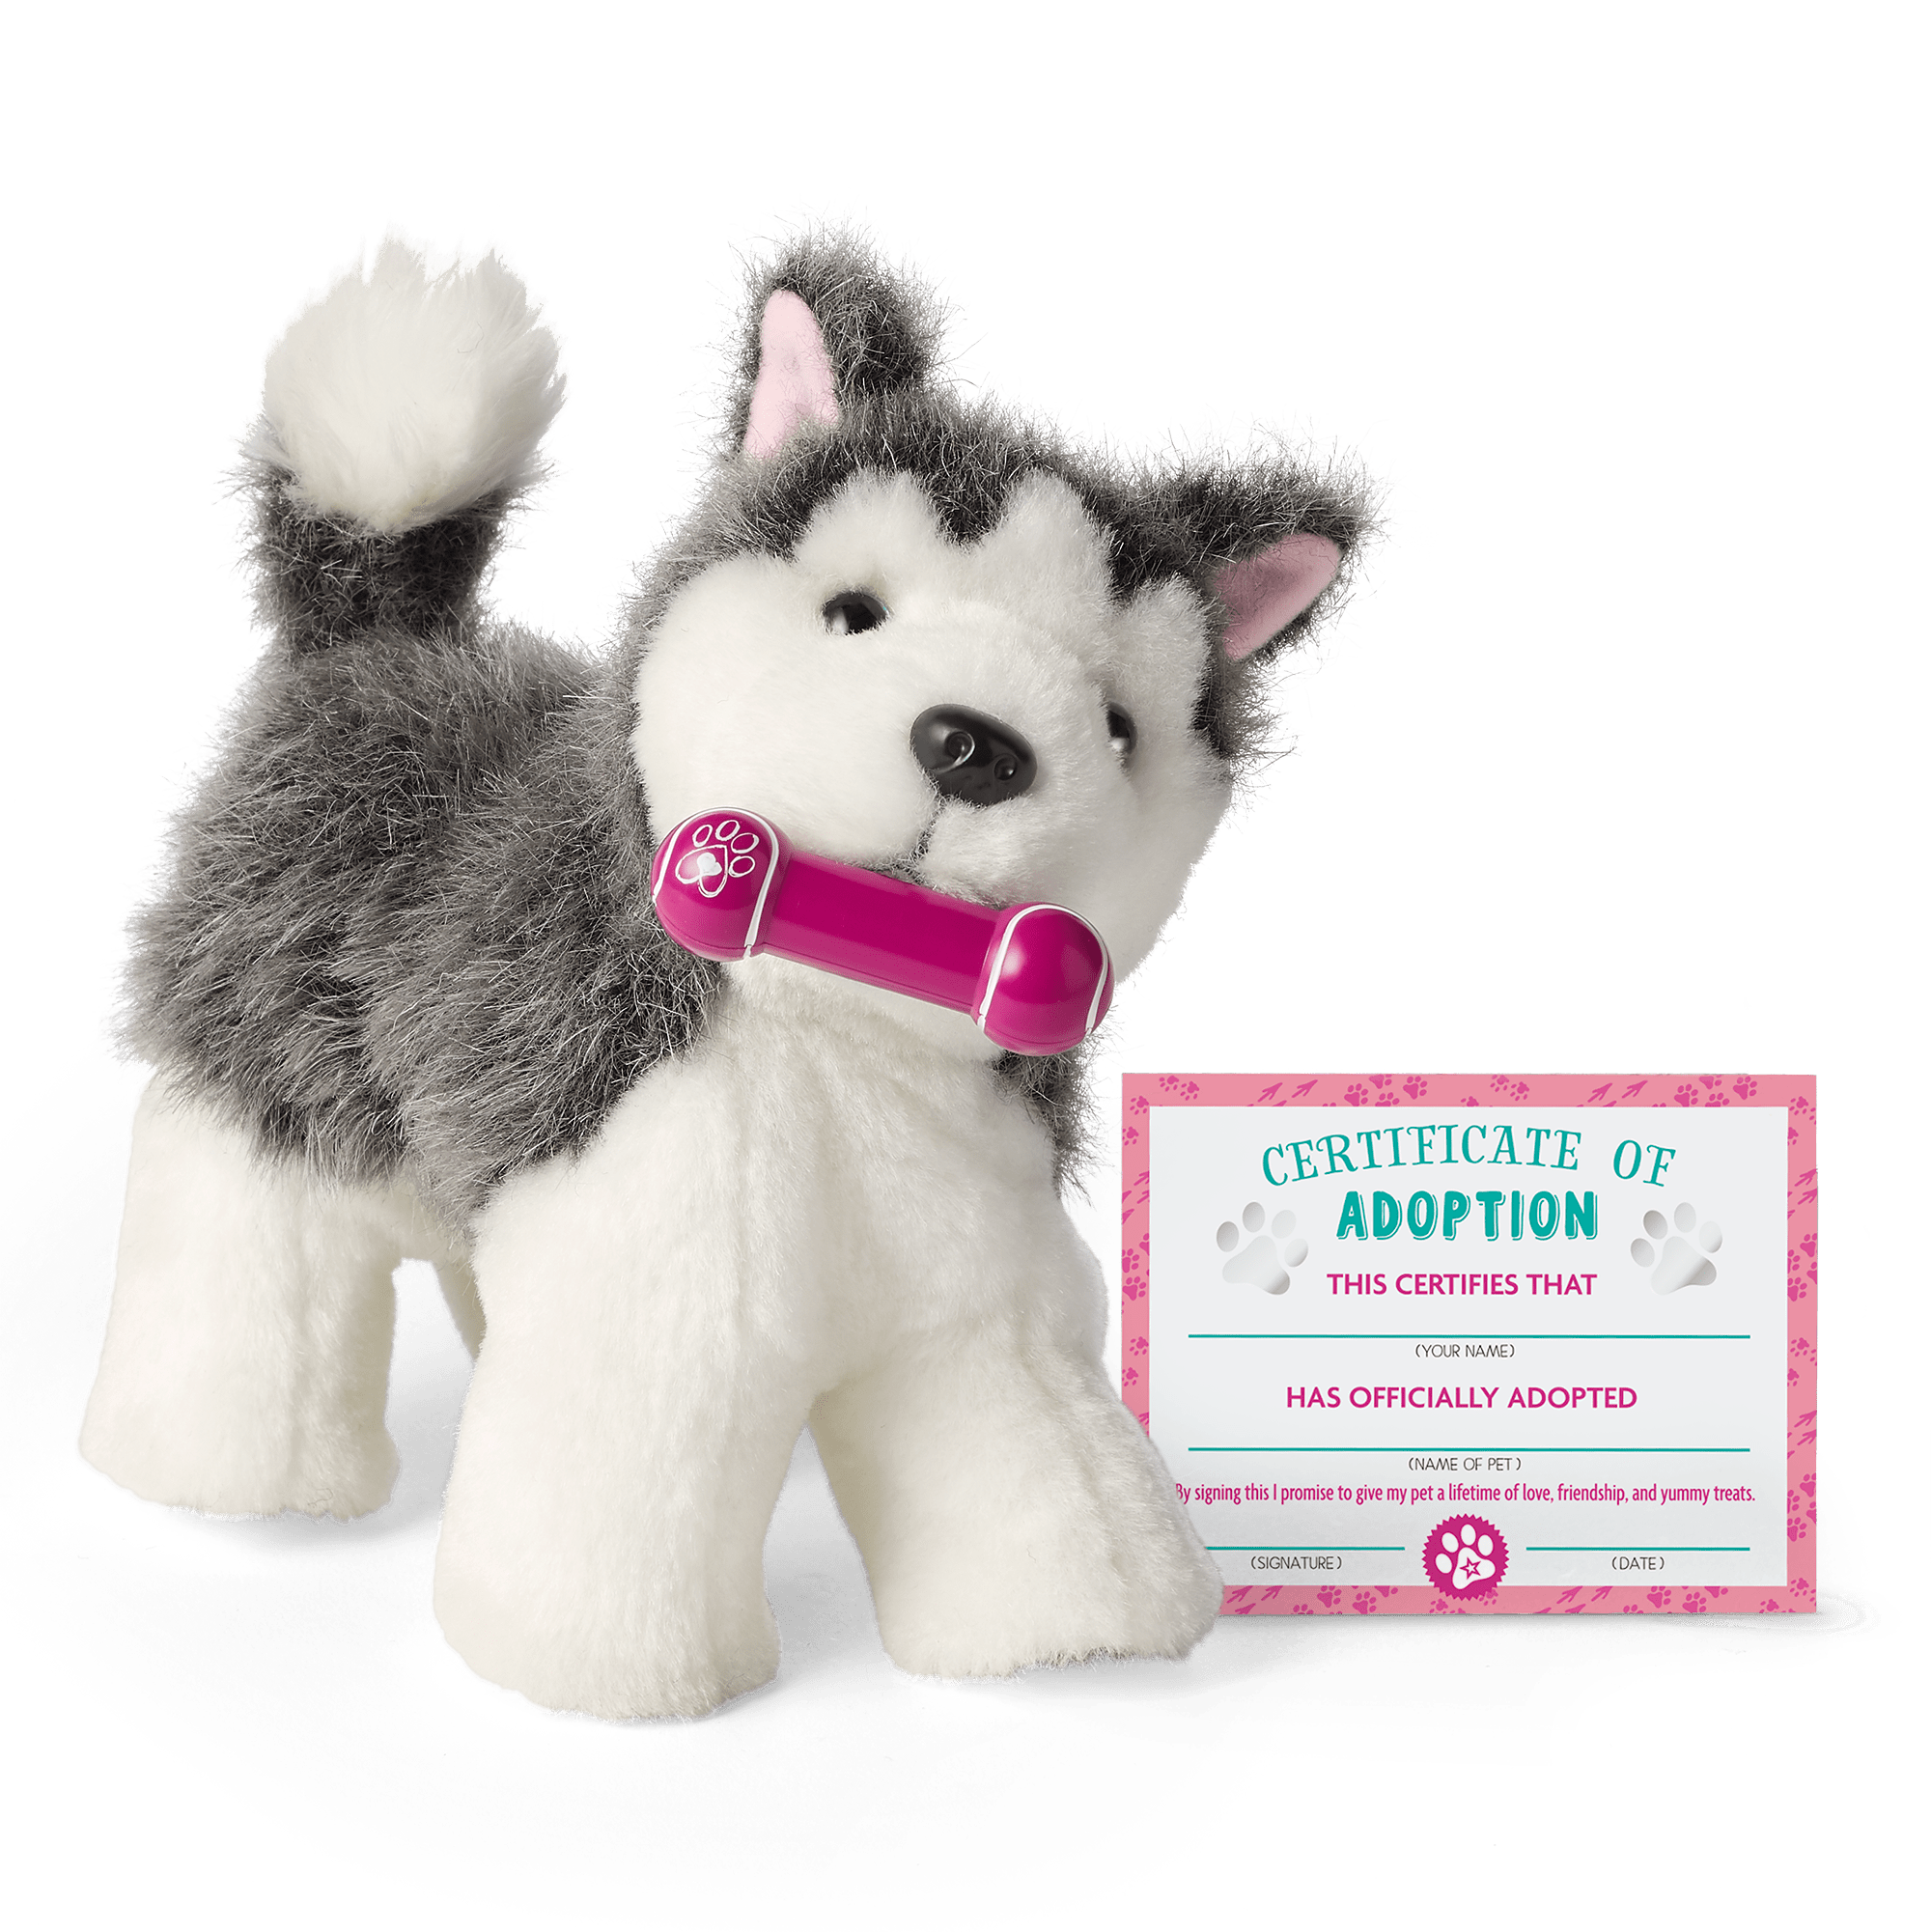 New York Doll Collection Plush Puppy Dog Accessories Play Set for 18 inch Dolls - Pet Accessory Set Fits American Girl Dolls